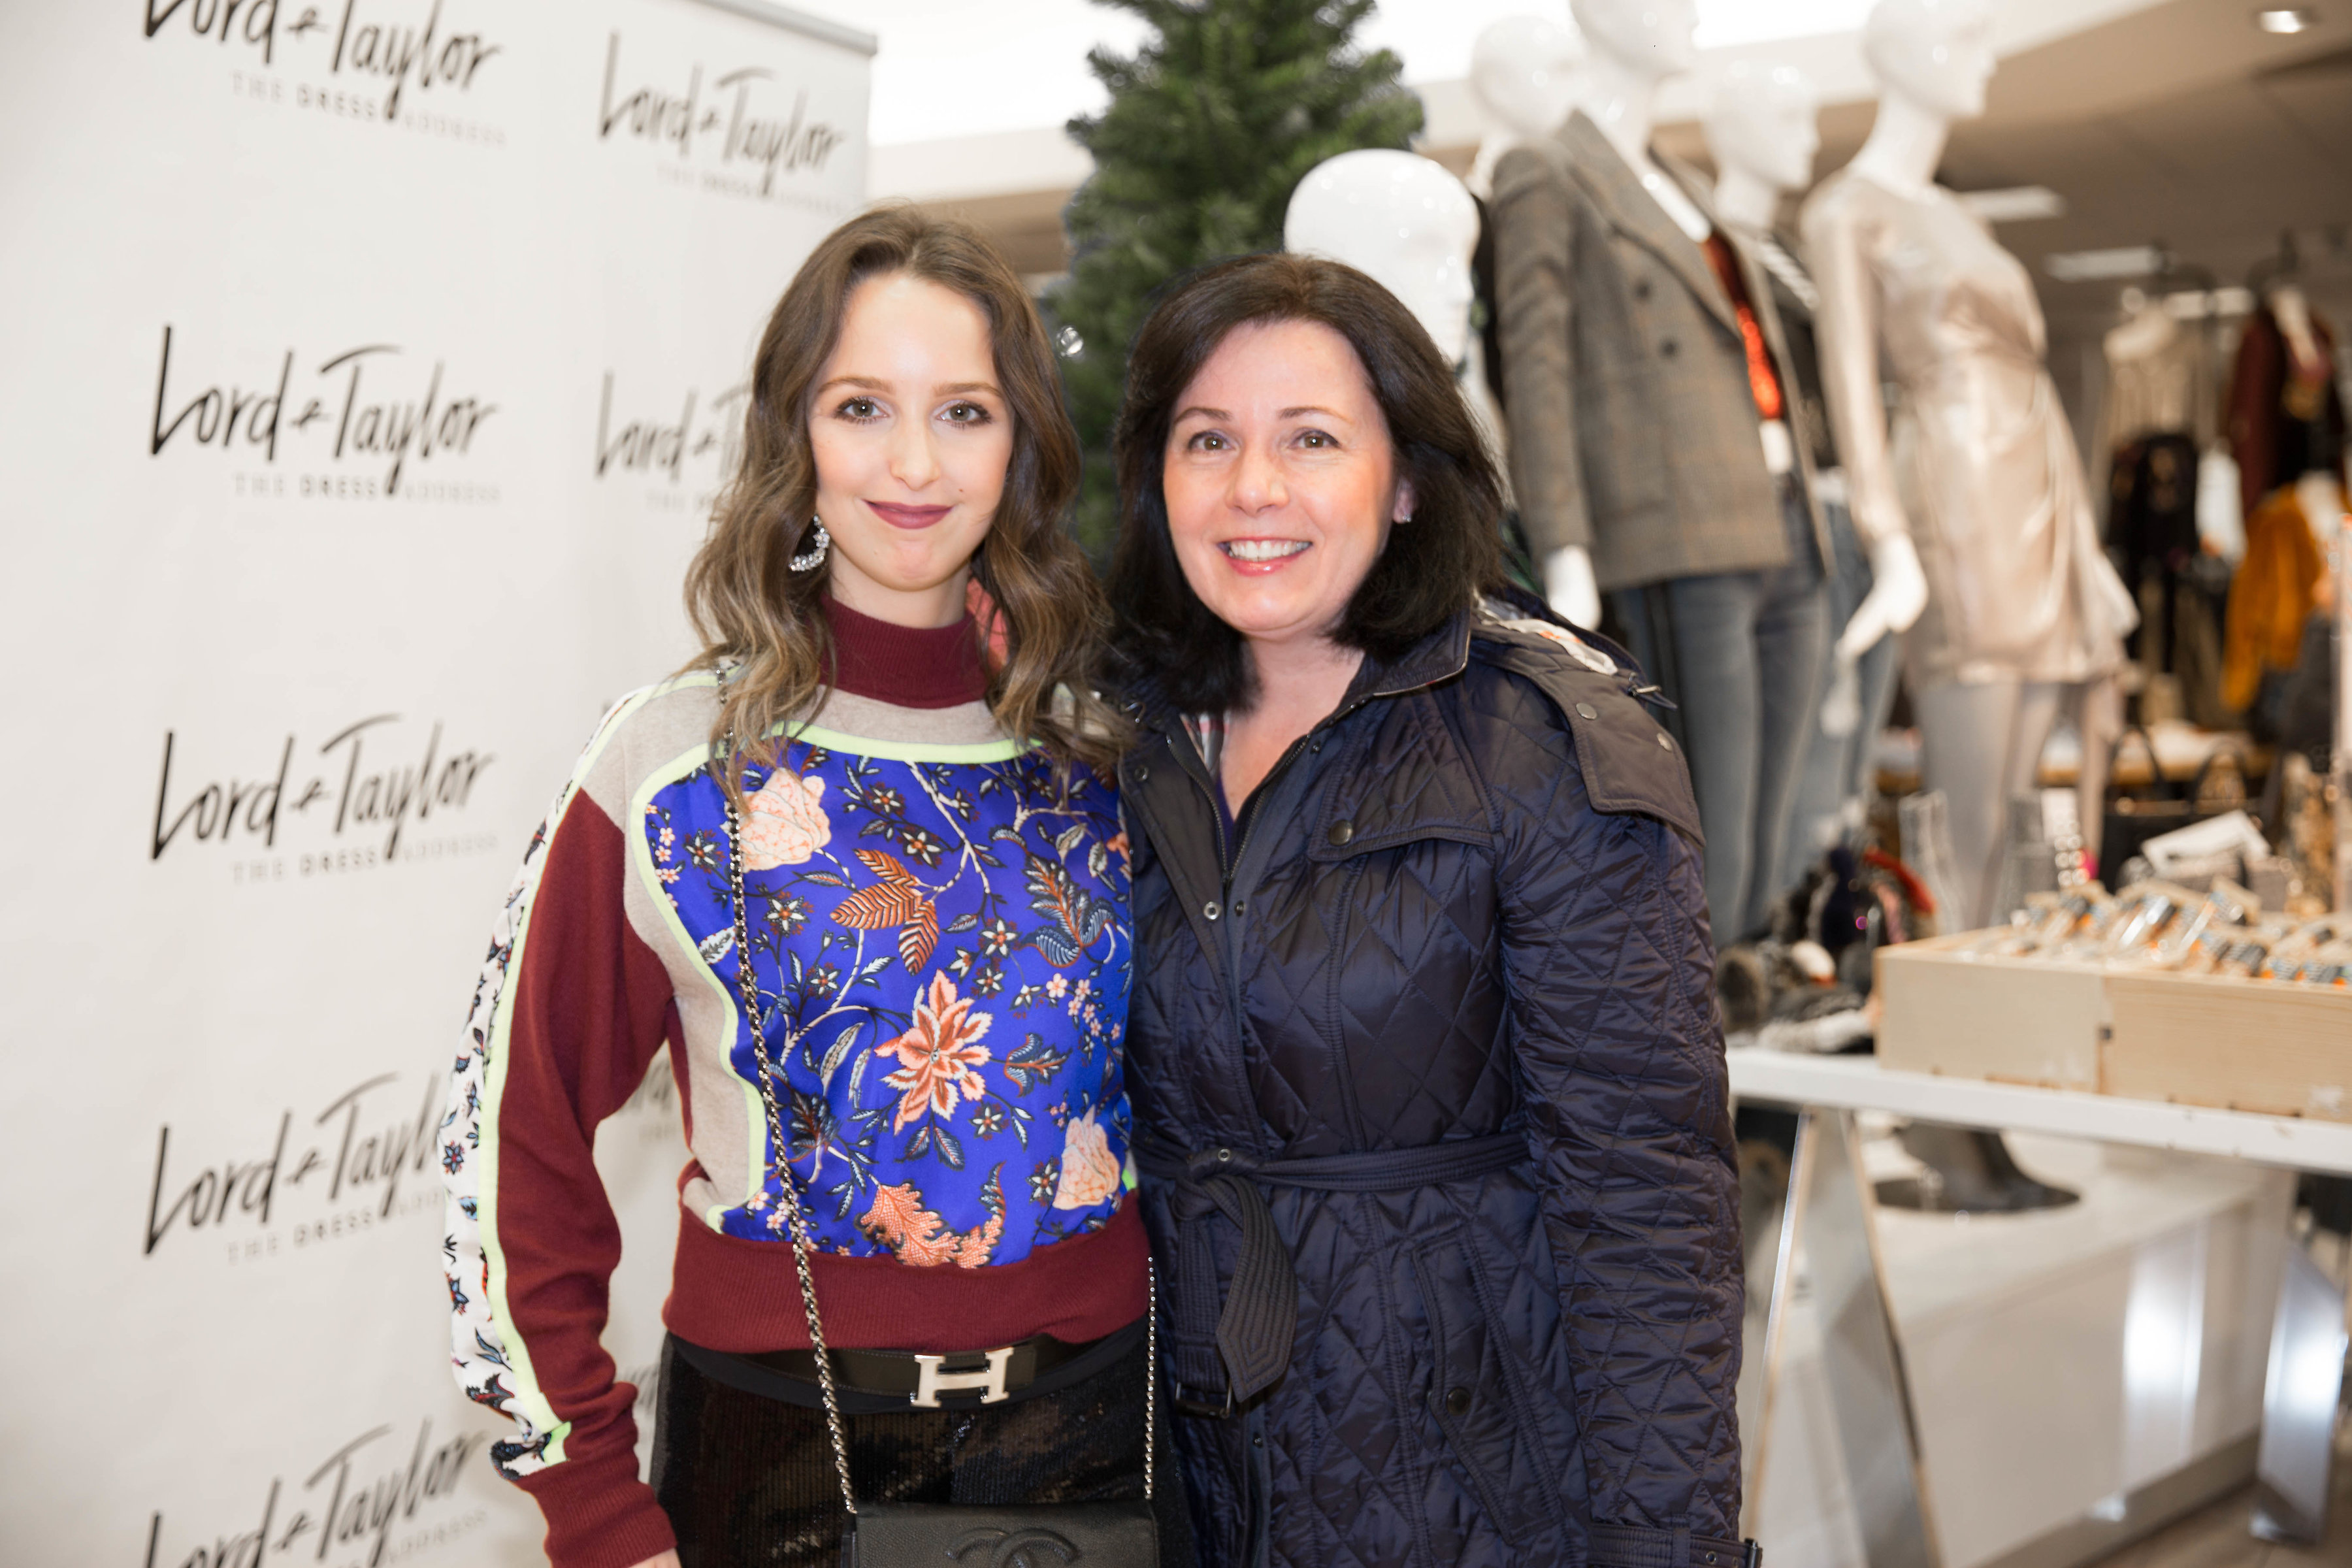 lord & taylor-simply by simone-event-westchester-ny-blogger-style-dvf-hermes-chanel-meet and greet-bauble bar